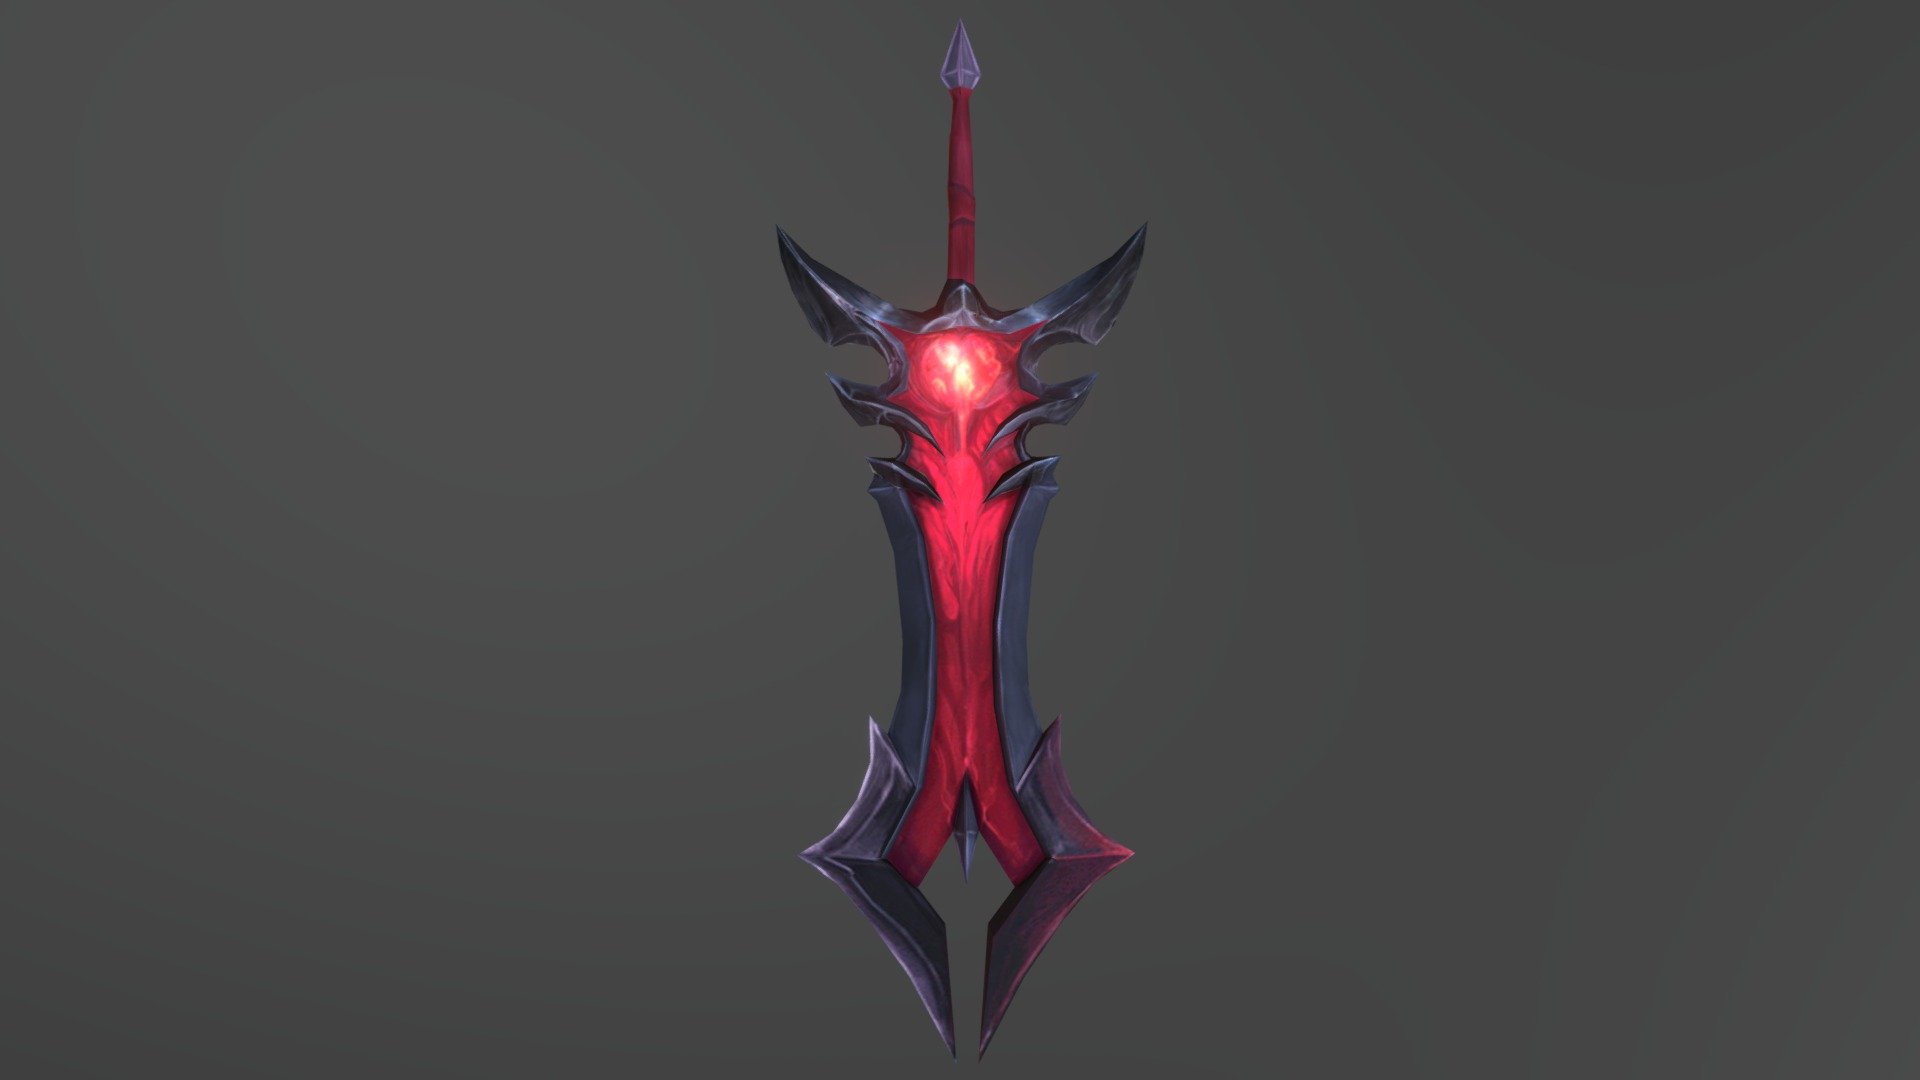 A fallen god-warrior who once threatened to destroy Runeterra, Aatrox and his kin were bound to ancient weapons and imprisoned for centuries.

That age is over.

Now, with stolen flesh warped in brutal approximation of his previous form, the Darkin Blade seeks an apocalyptic and long overdue vengeance:

Total obliteration 3d model